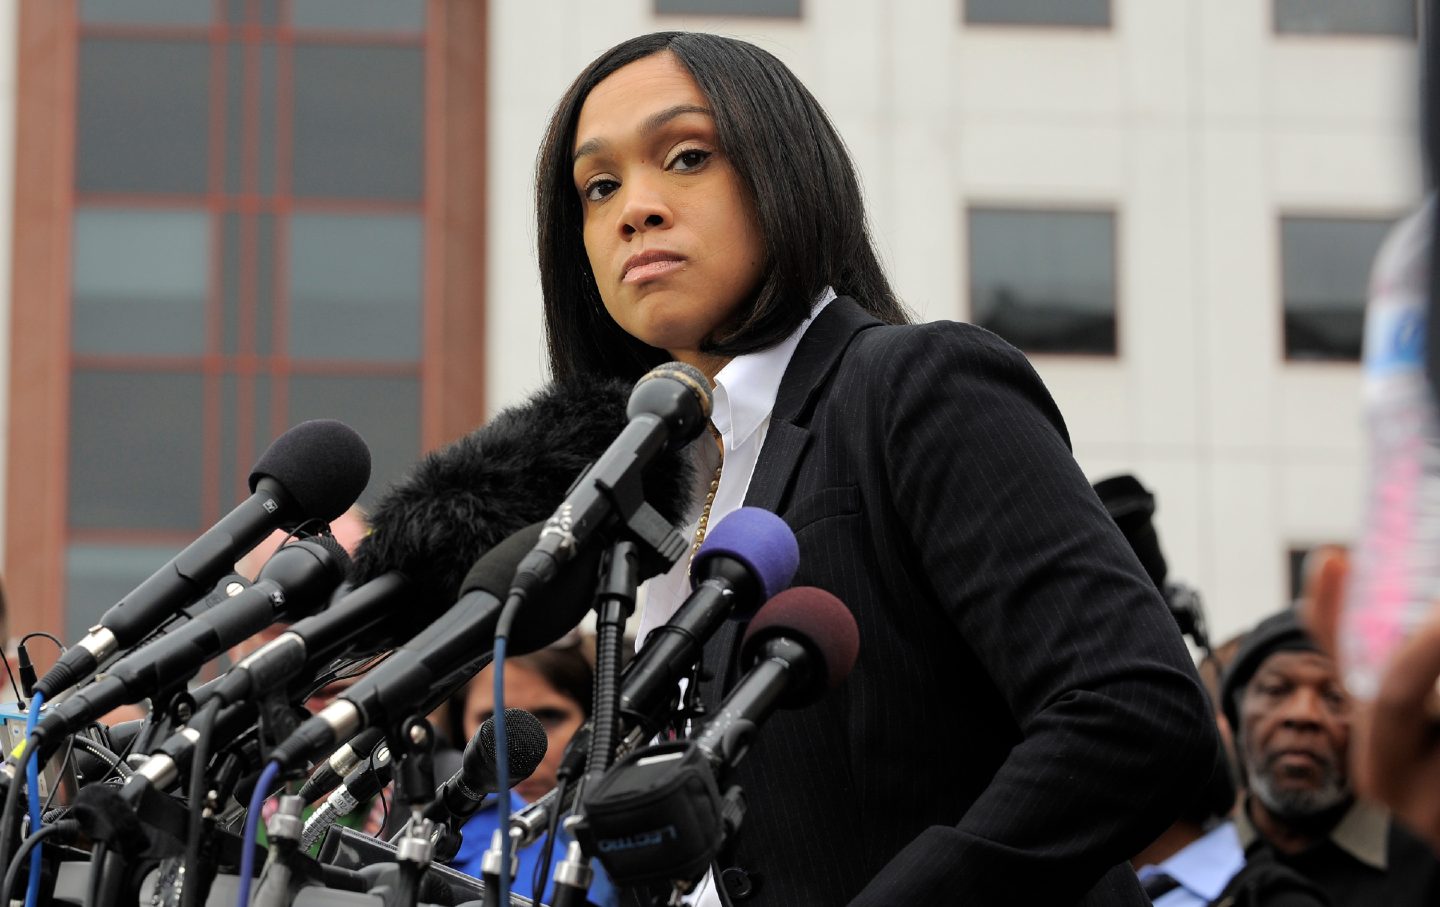 Former Baltimore state attorney Marilyn Mosby answers questions at a press conference about the arrests of police officers involved in the death of Freddie Gray on May 1, 2015.